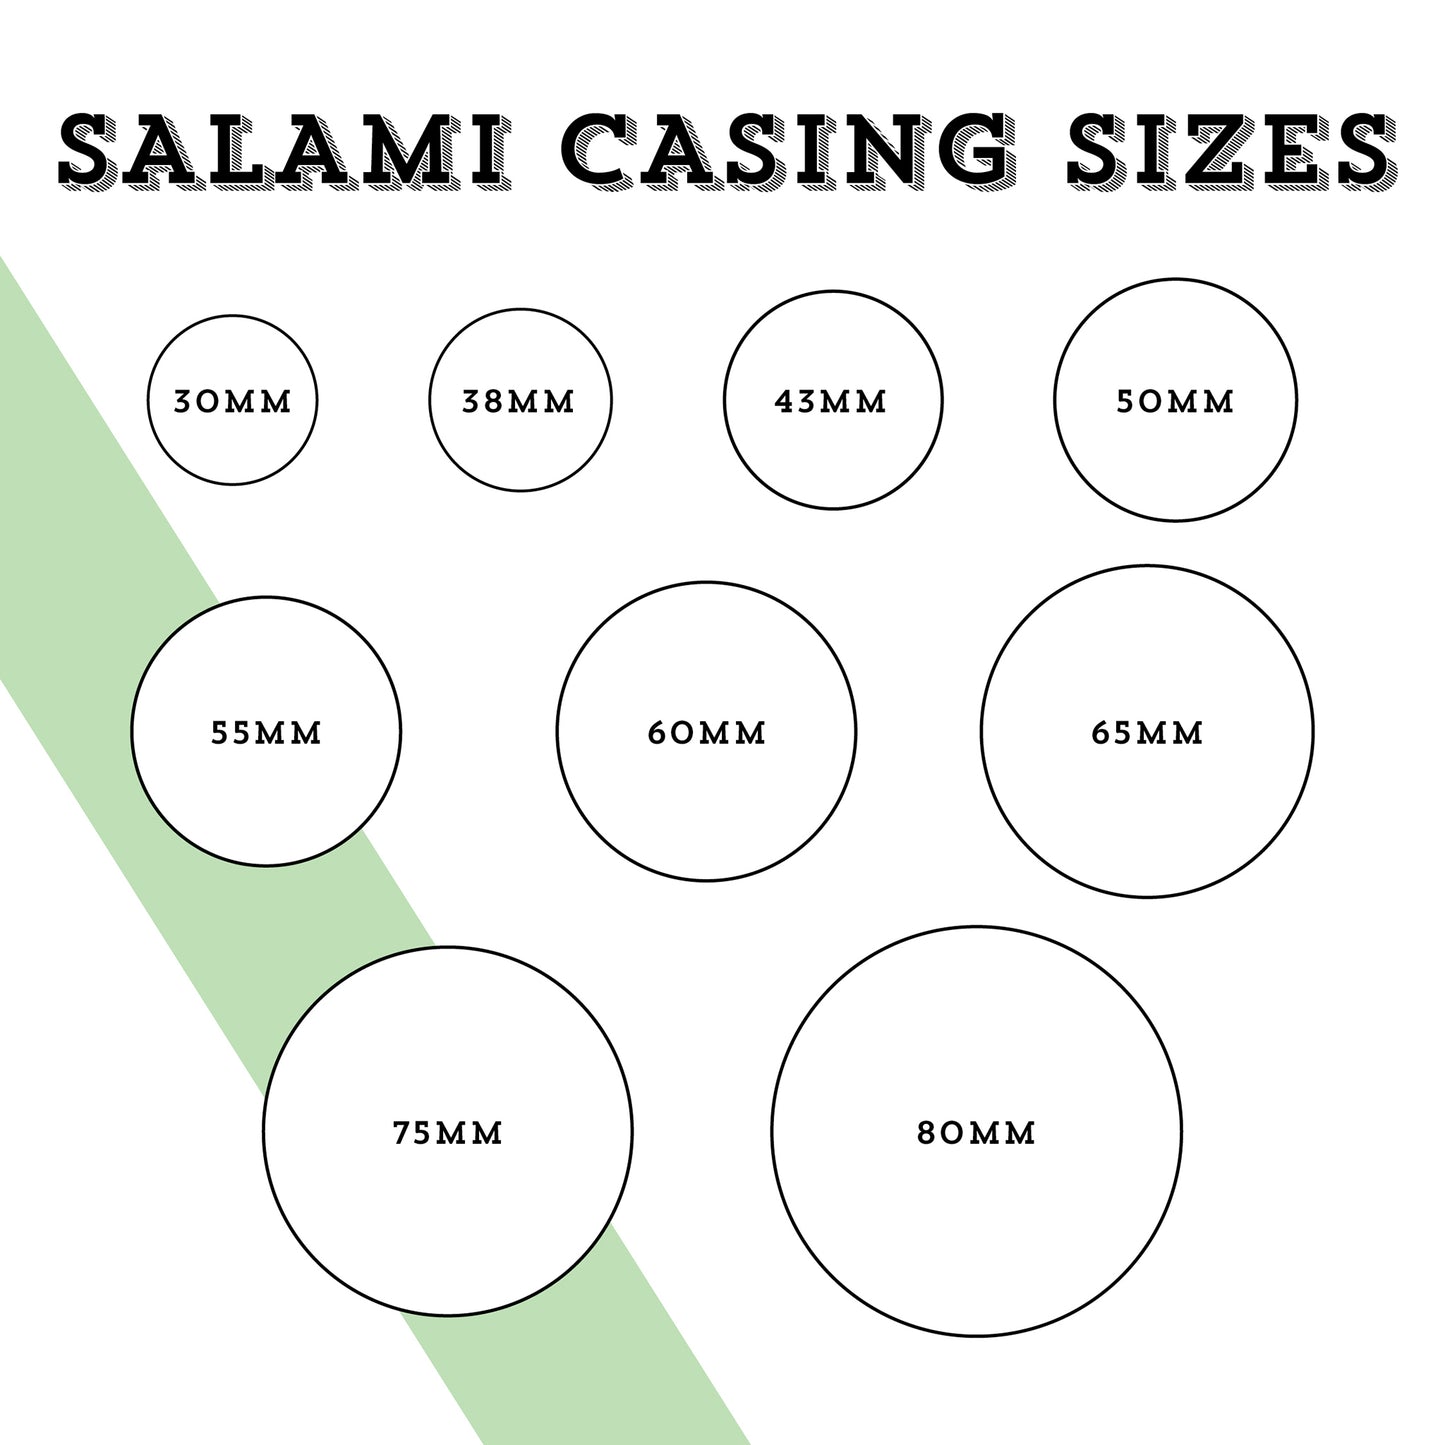 Image showing casing sizes in diameter after dried